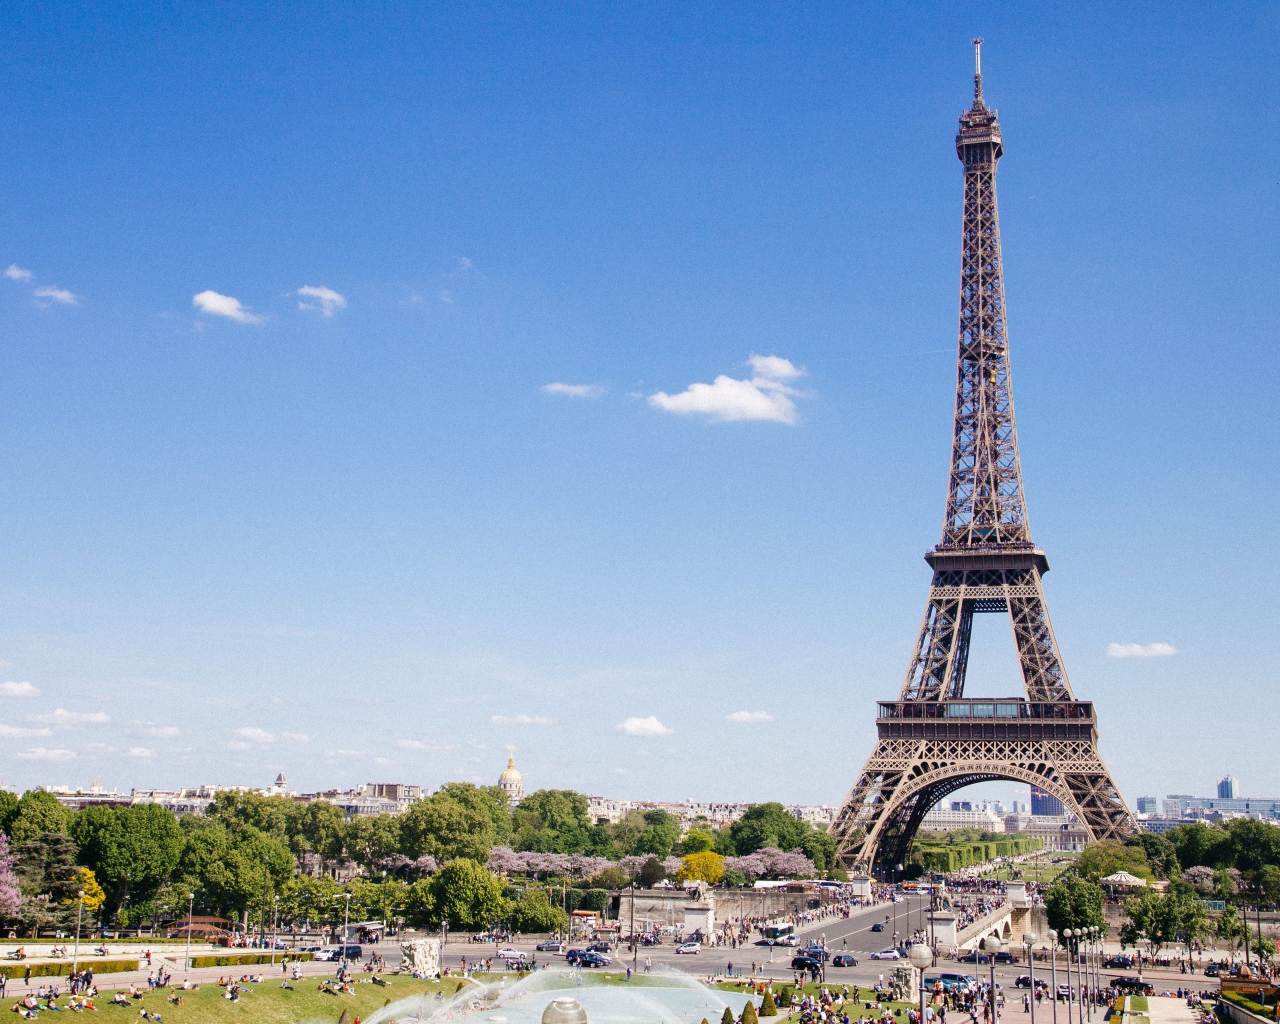 Nice view of the famous Eiffel Tower under the blue sky, Paris